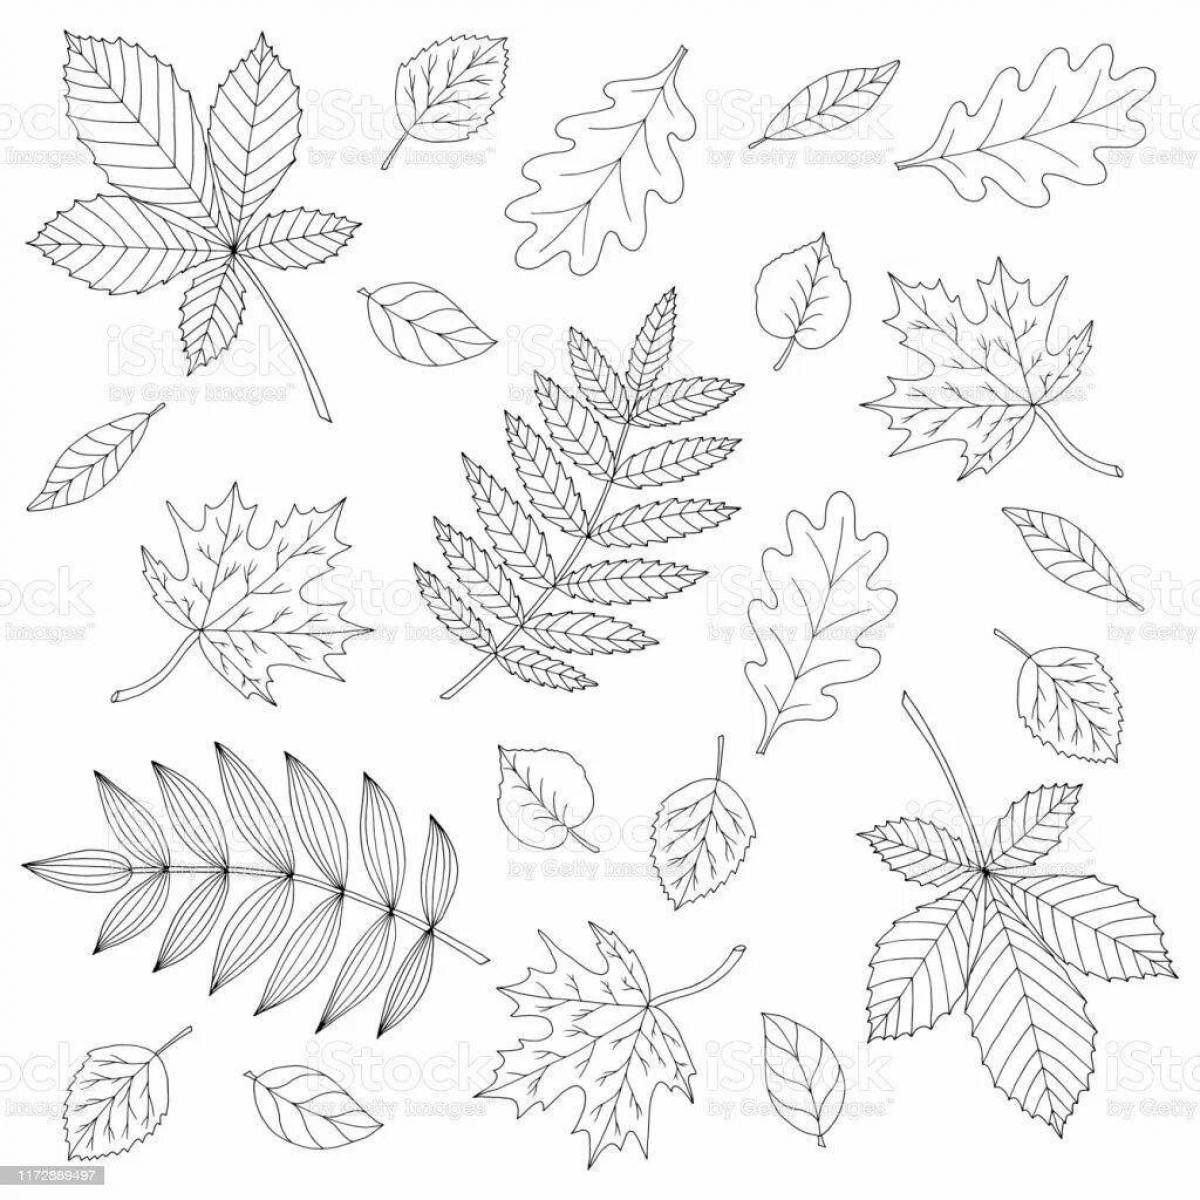 Adorable leaf coloring page